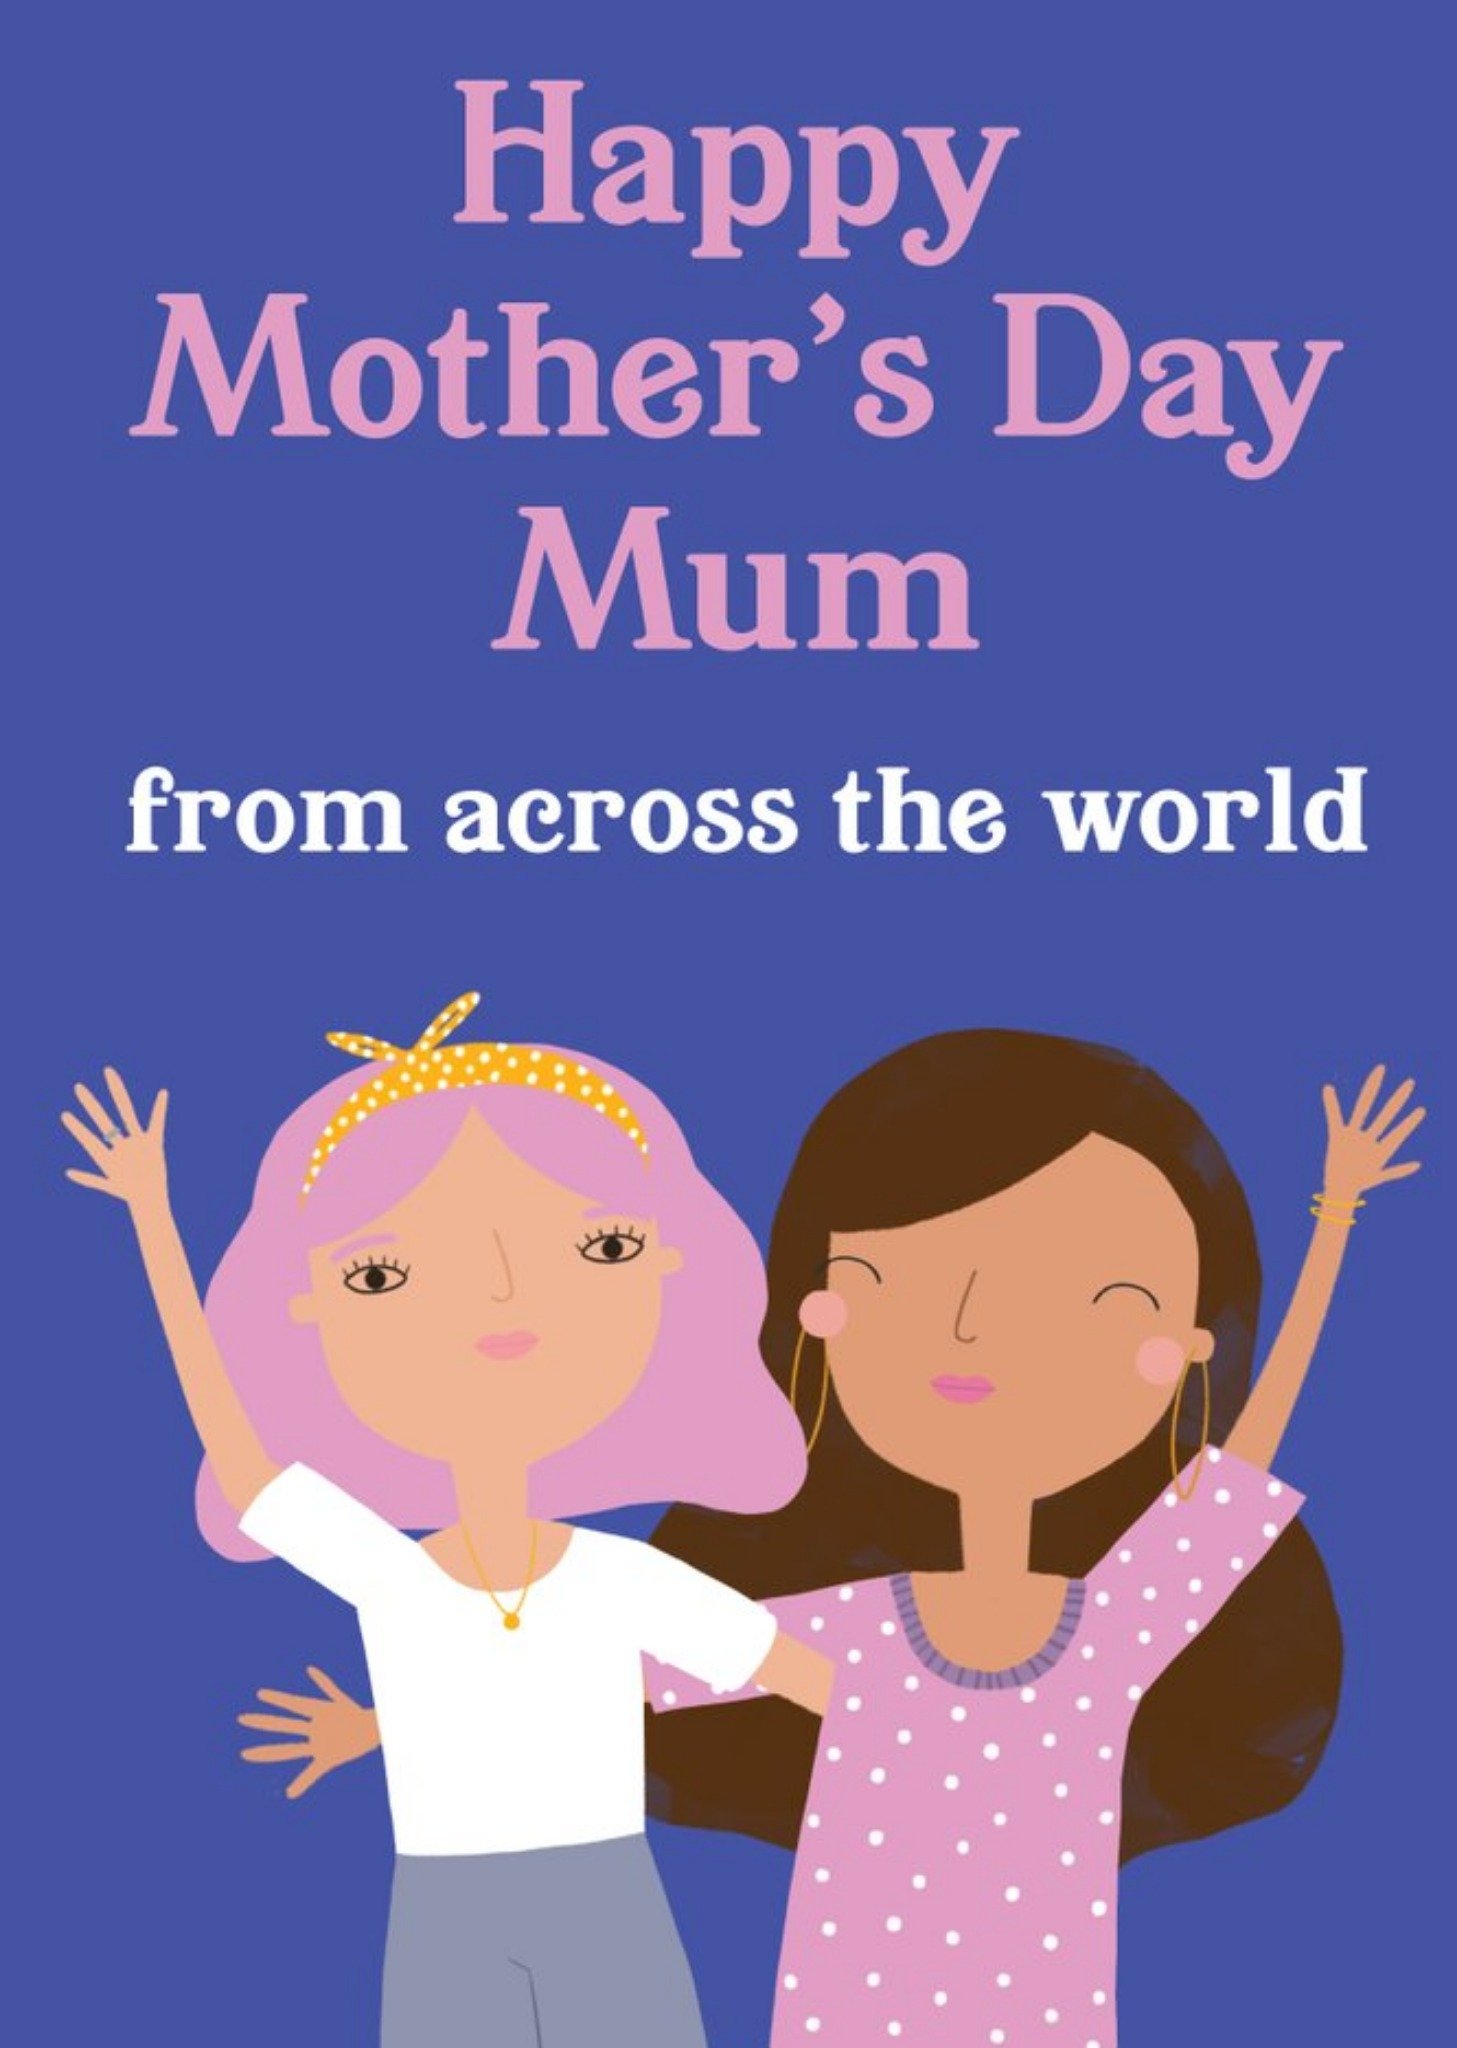 Moonpig Paperlink Choose Joy Happy Mother's Day Mum From Across The World Card Ecard